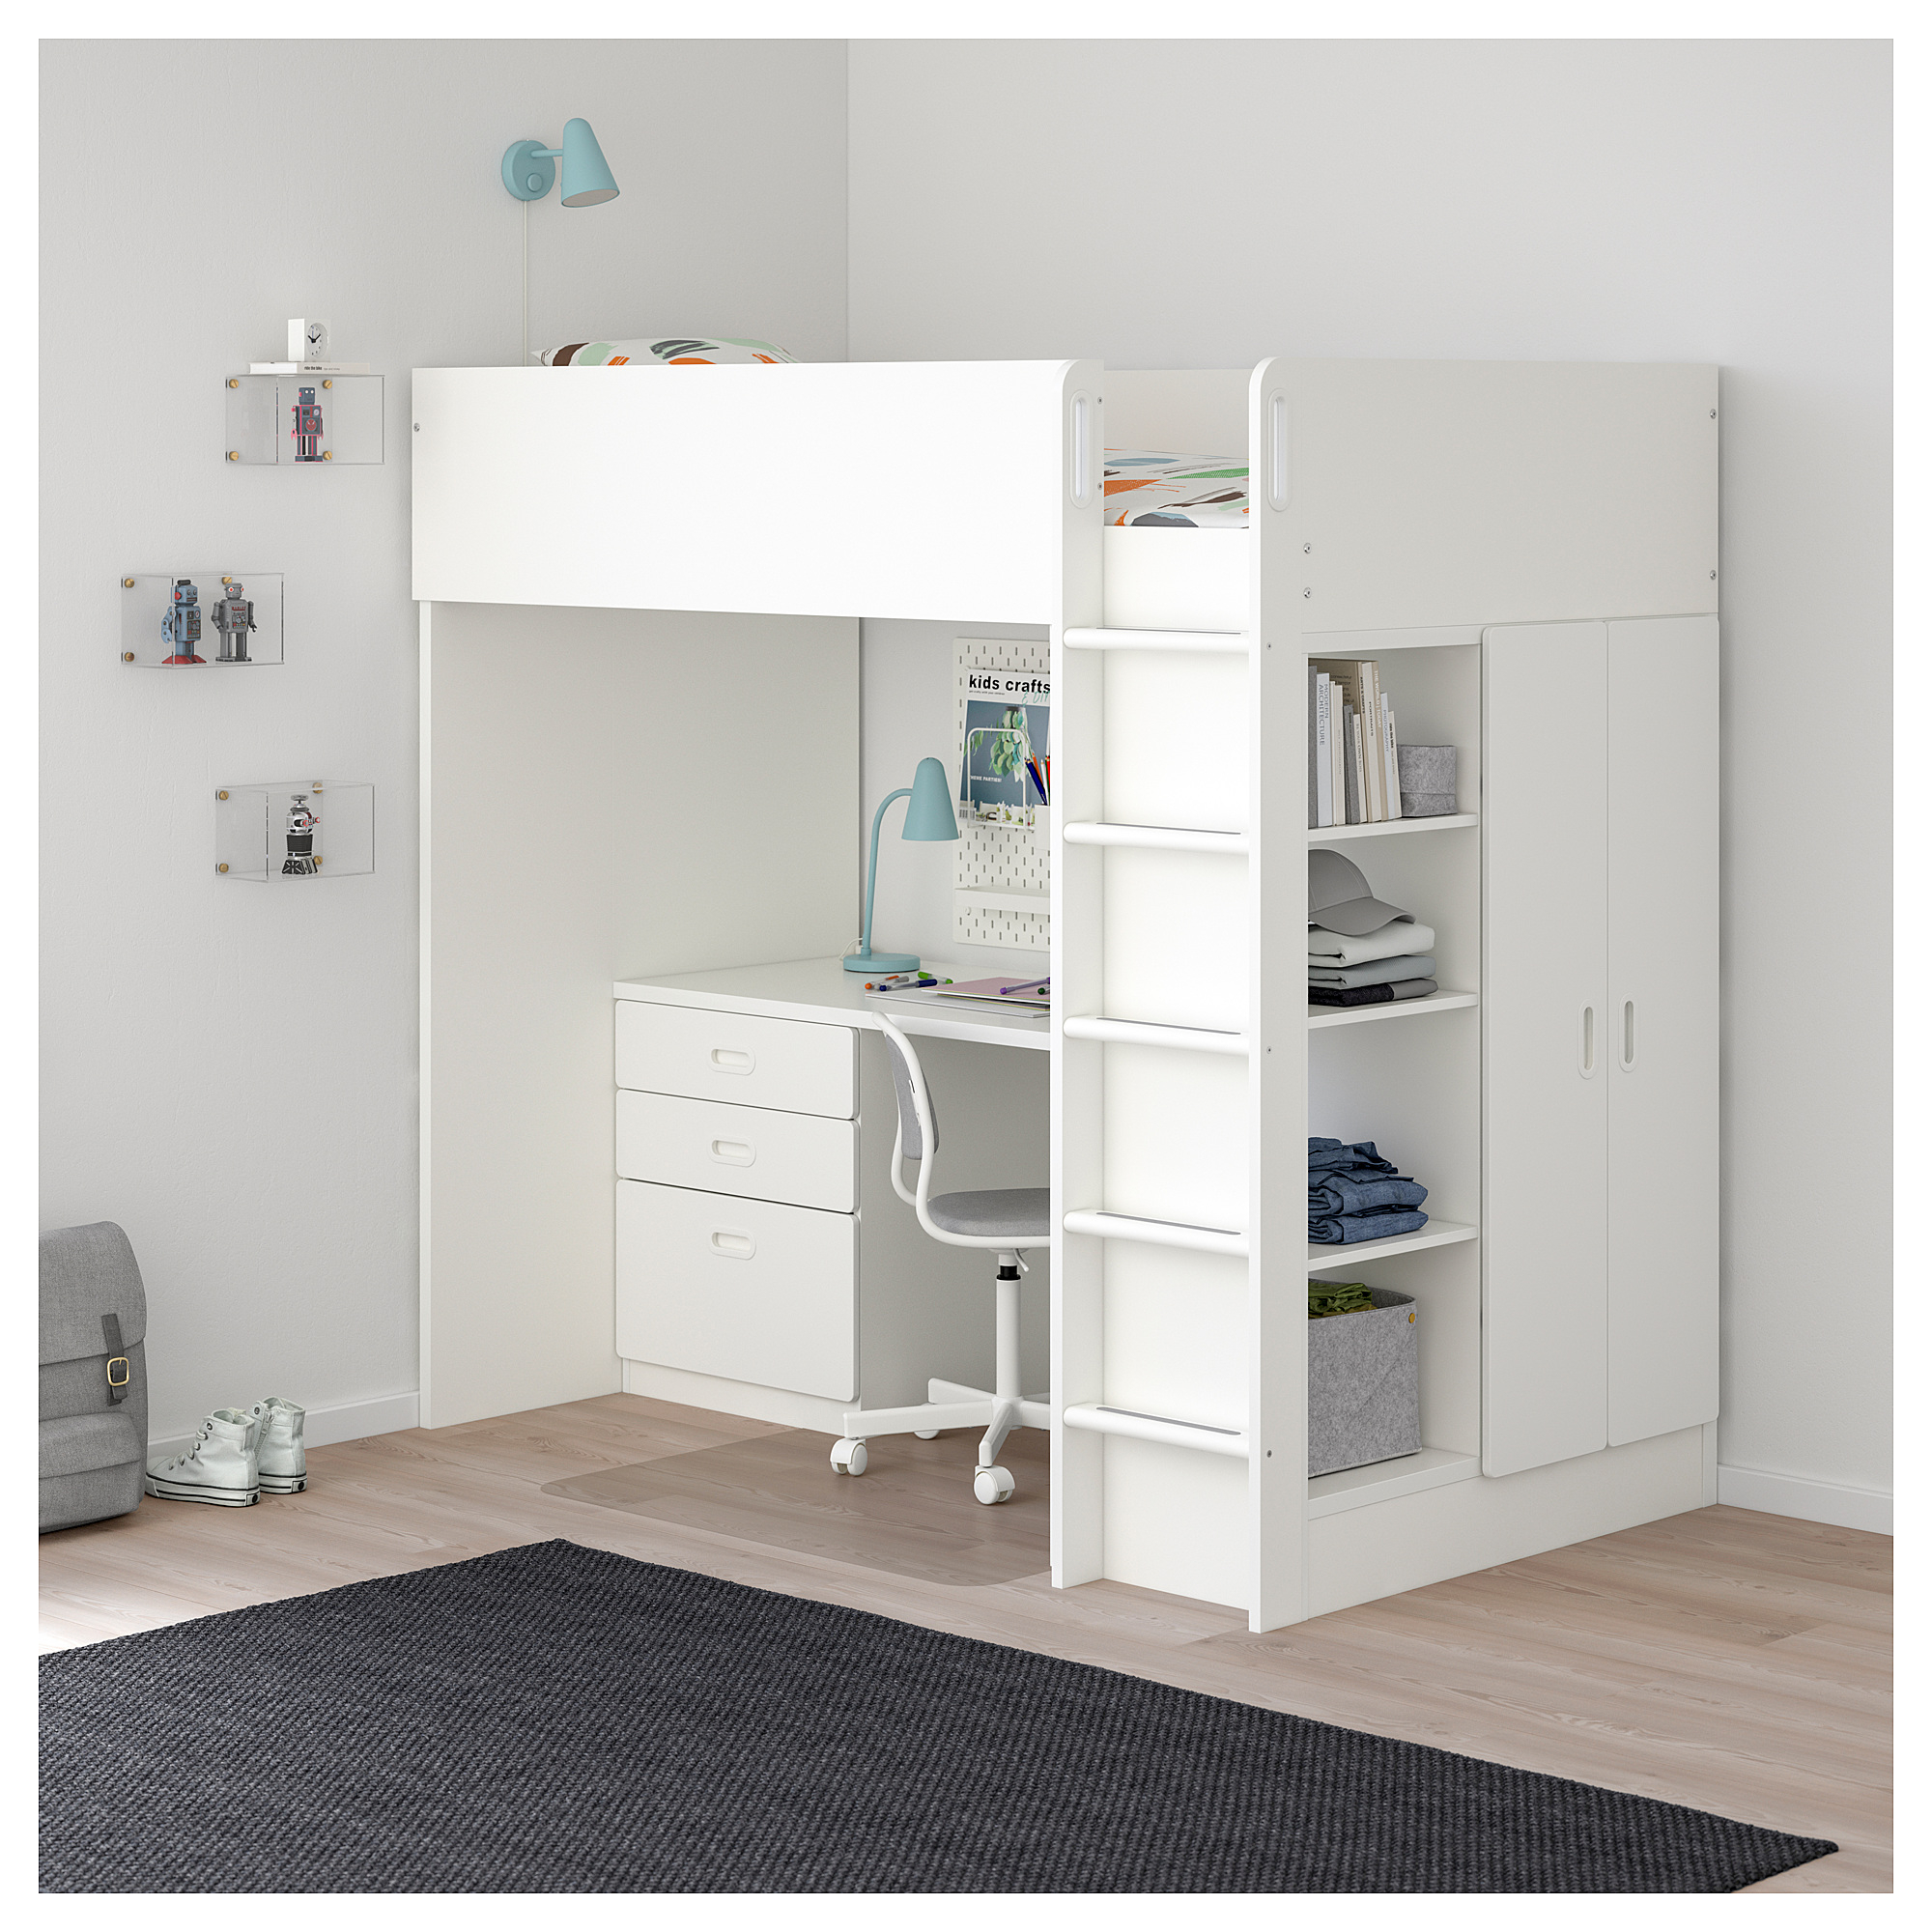 Ikea Loft Beds To Or Not In, Bunk Beds With Storage Ikea